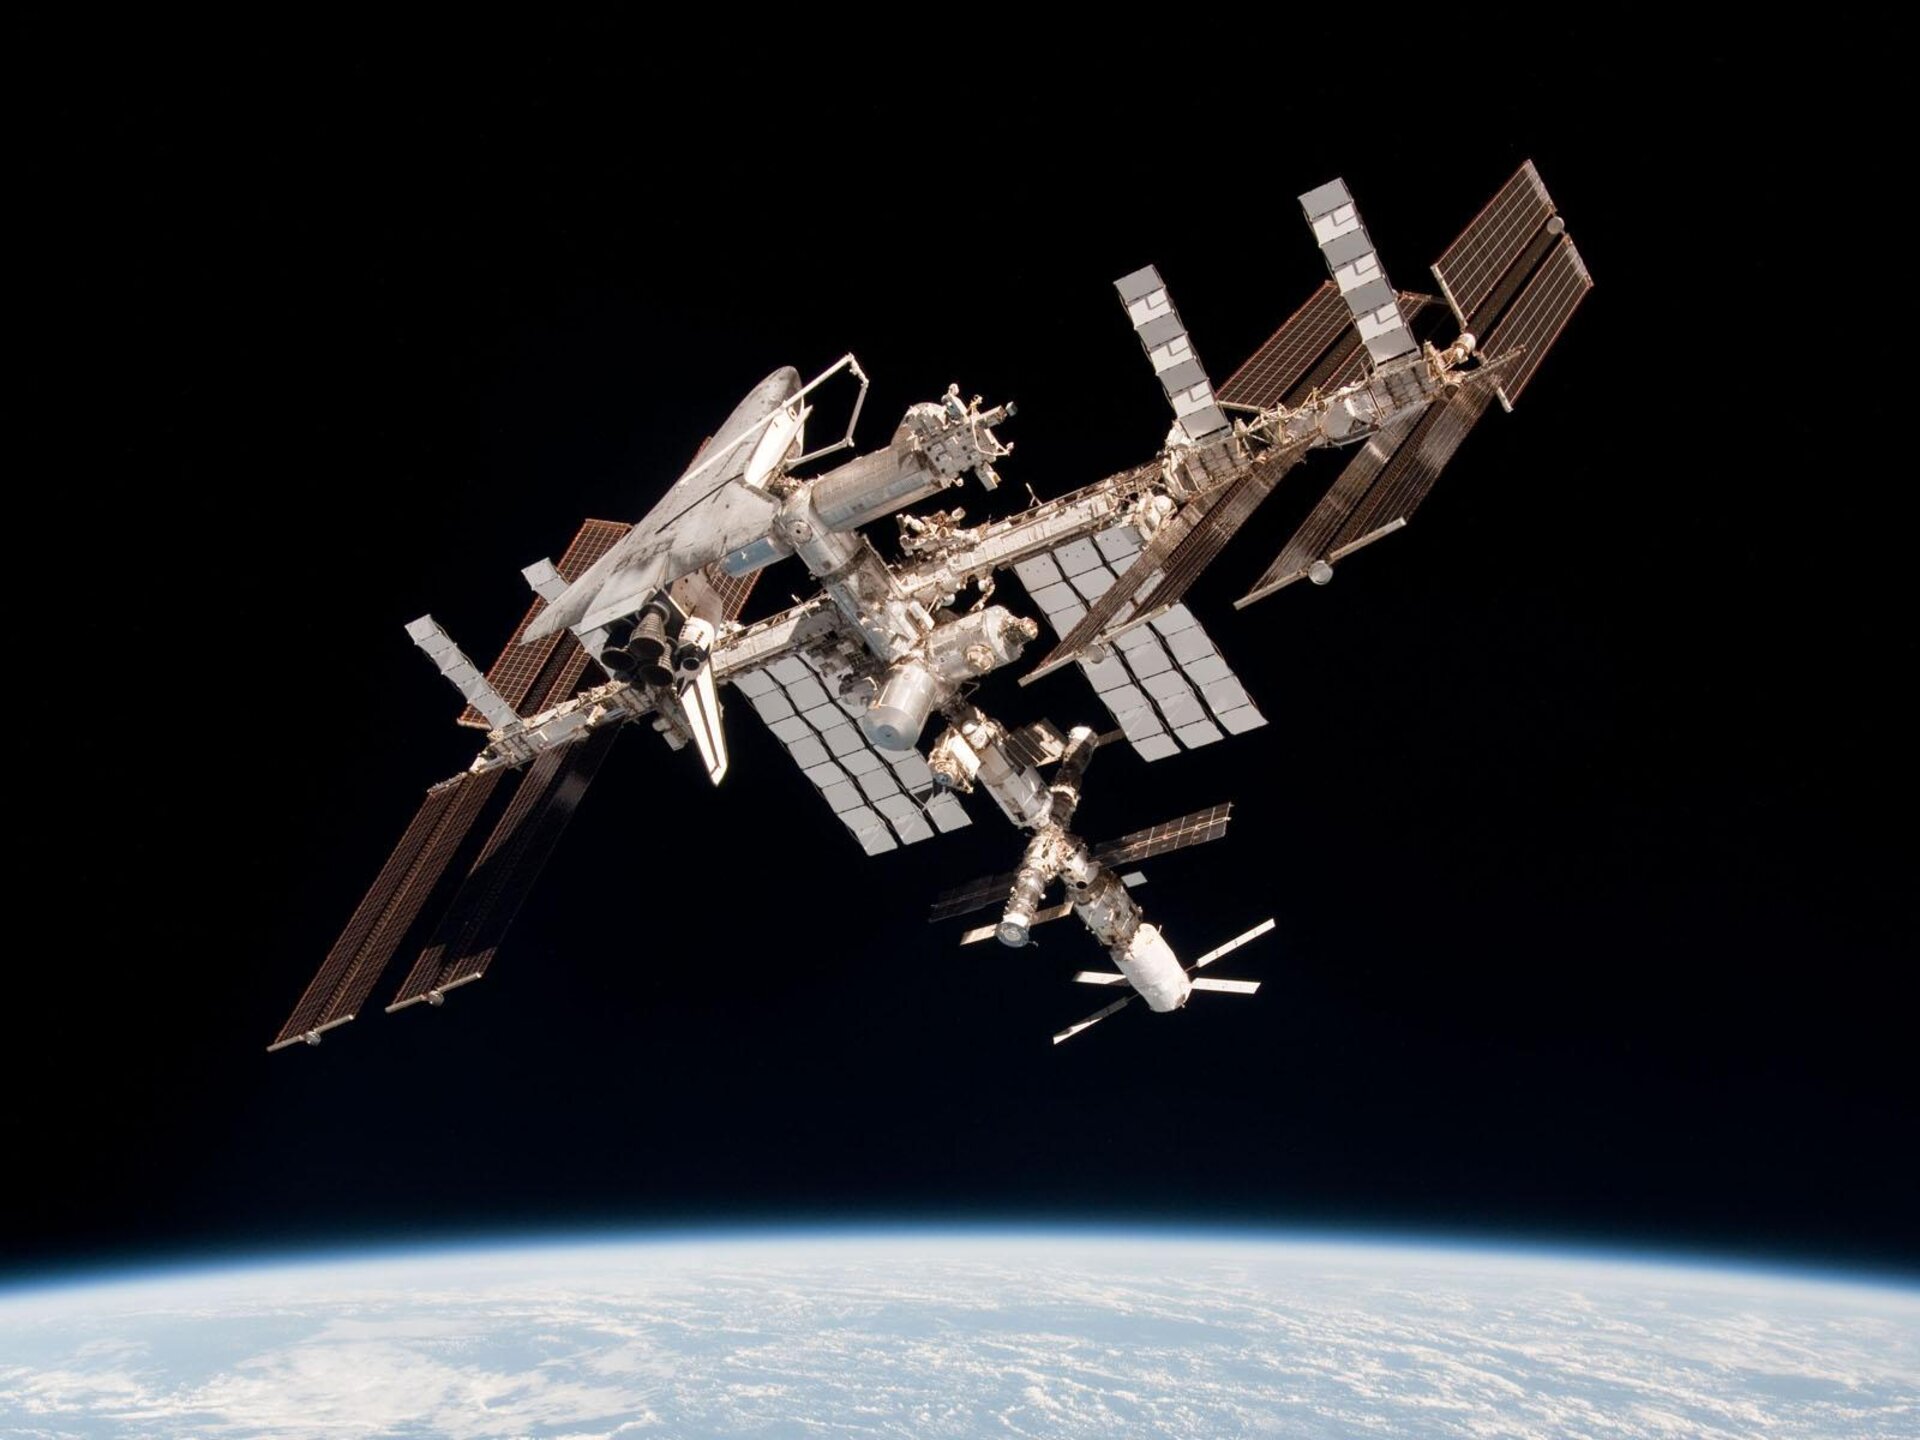 ESA - The story behind Paolo's Space Station photos